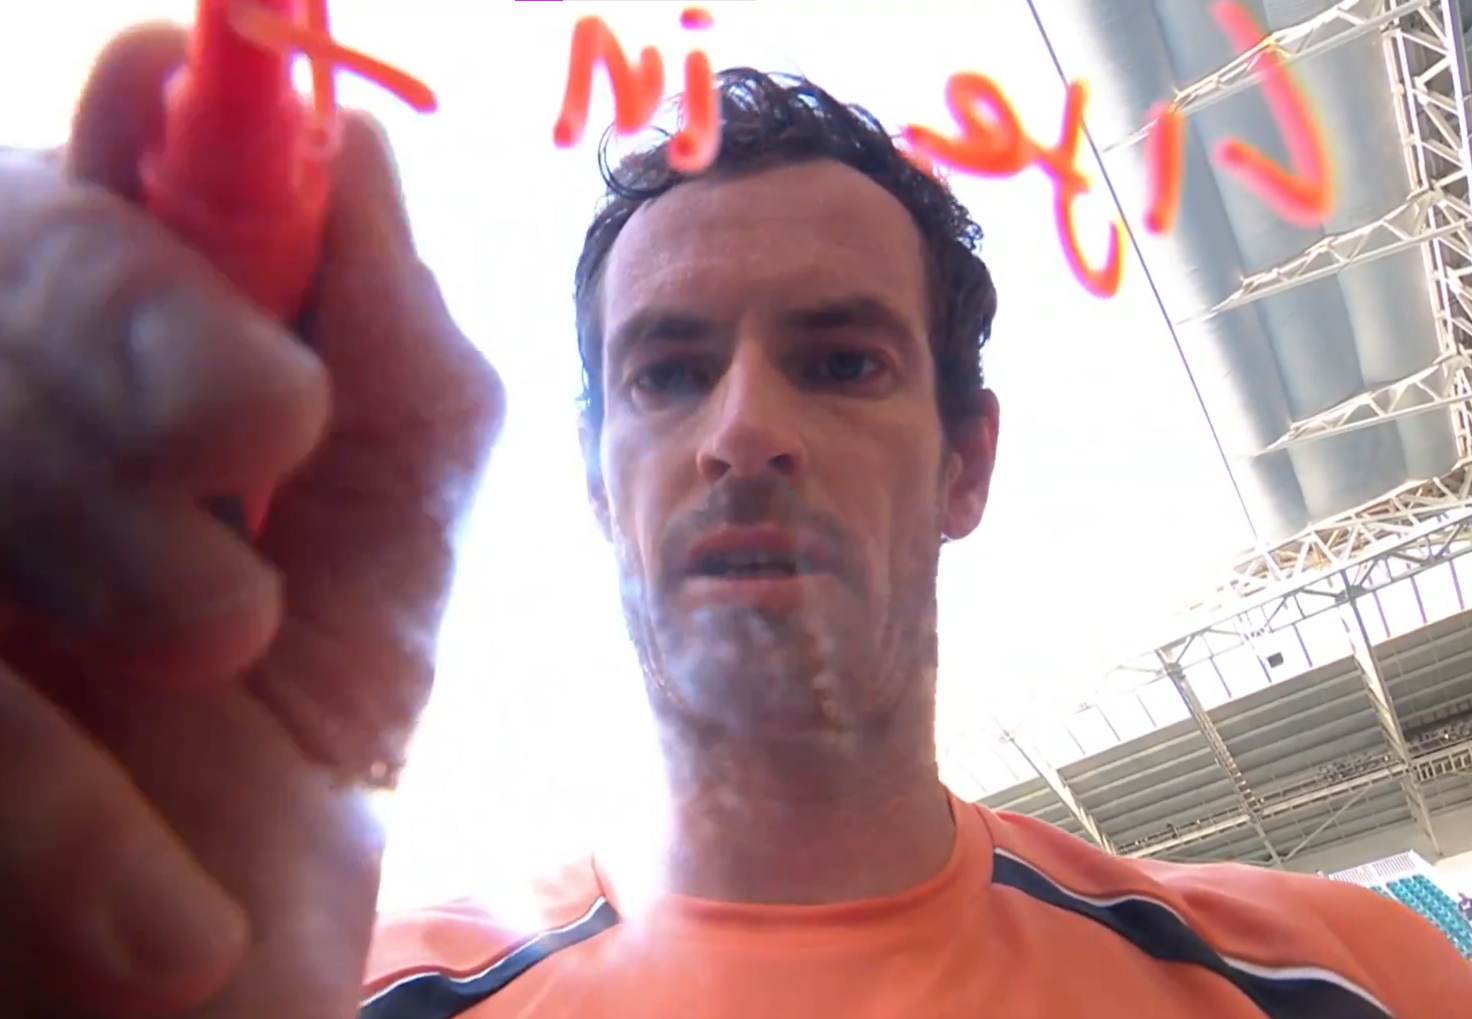 Andy Murray writes six-word message to critics on TV camera after Miami Open comeback